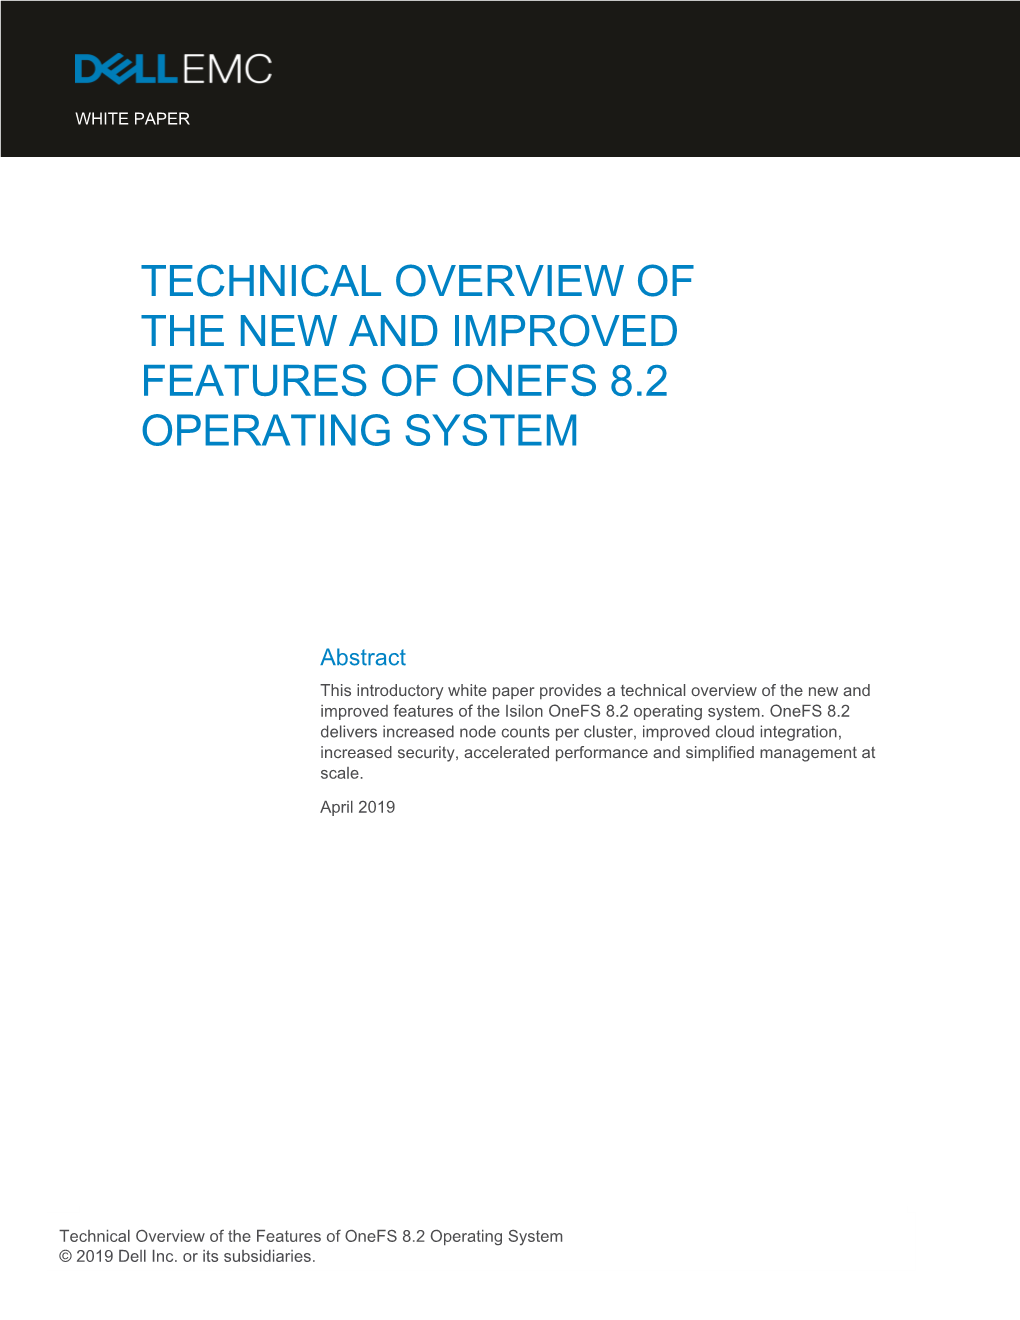 Technical Overview of the New and Improved Features of Isilon Onefs Operating System